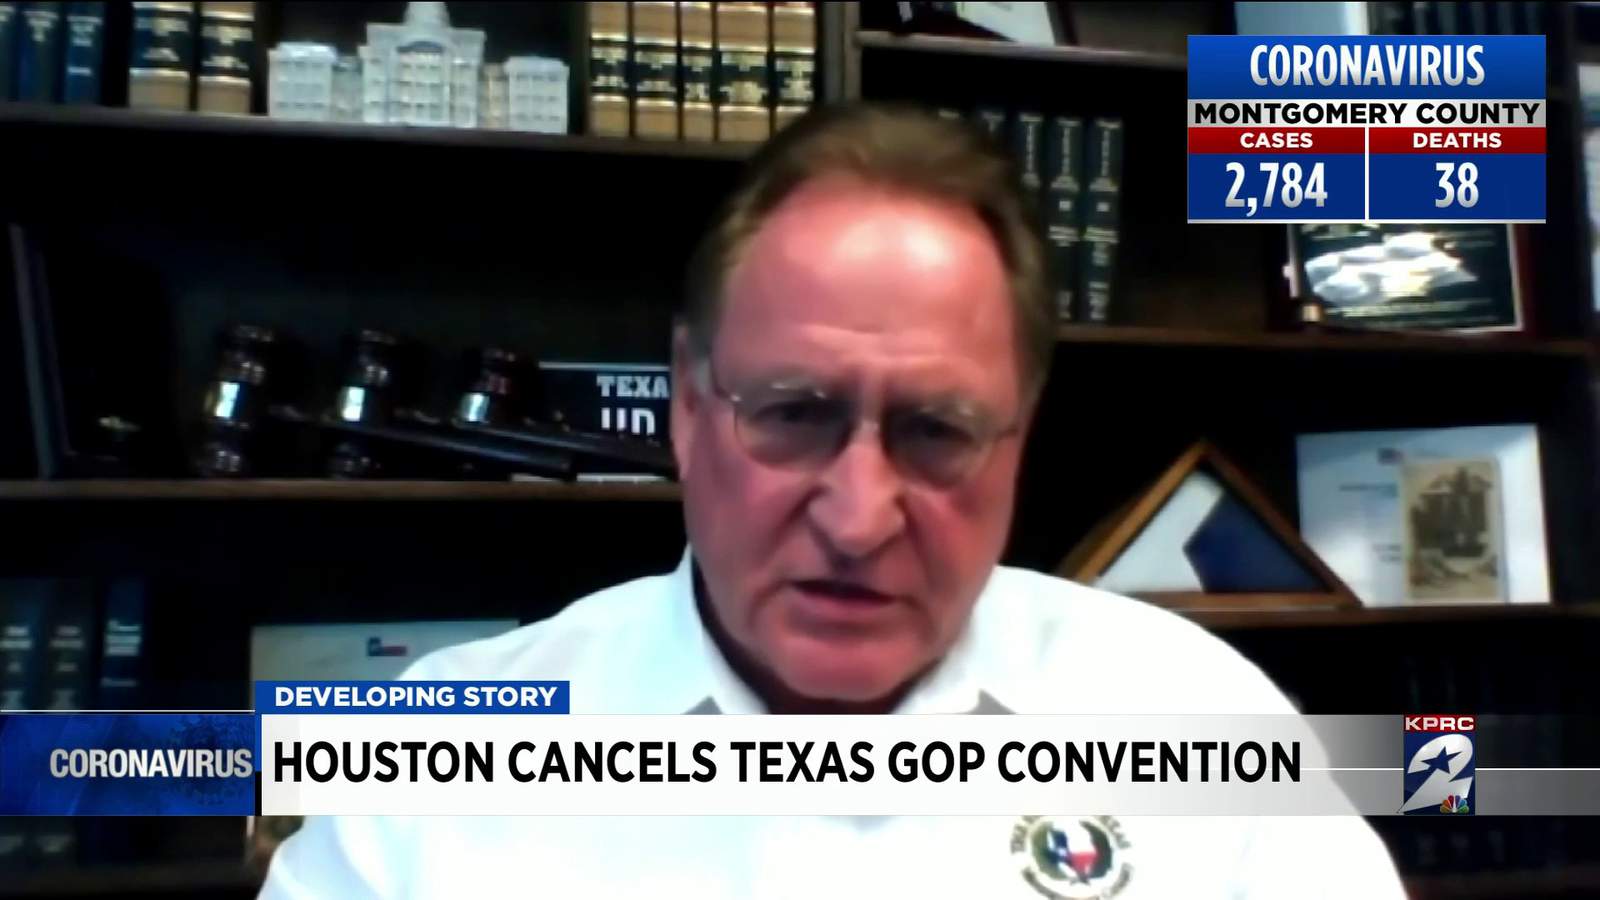 ‘Will continue unimpeded': Texas GOP leaders cry foul after Houston cancels in-person convention at GRB